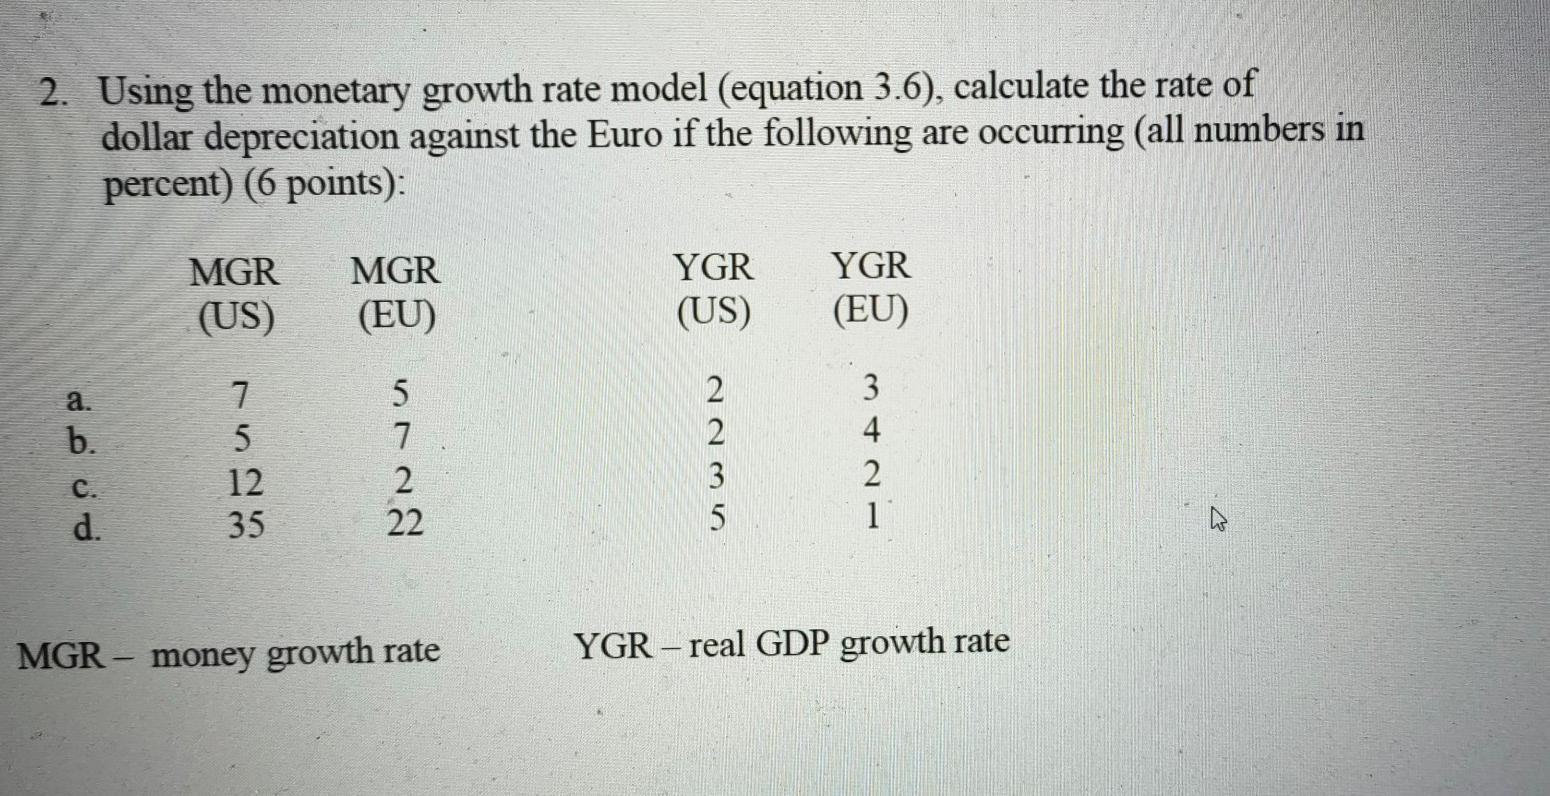 2. Using the monetary growth rate model (equation 3.6), calculate the rate of dollar depreciation against the Euro if the fol